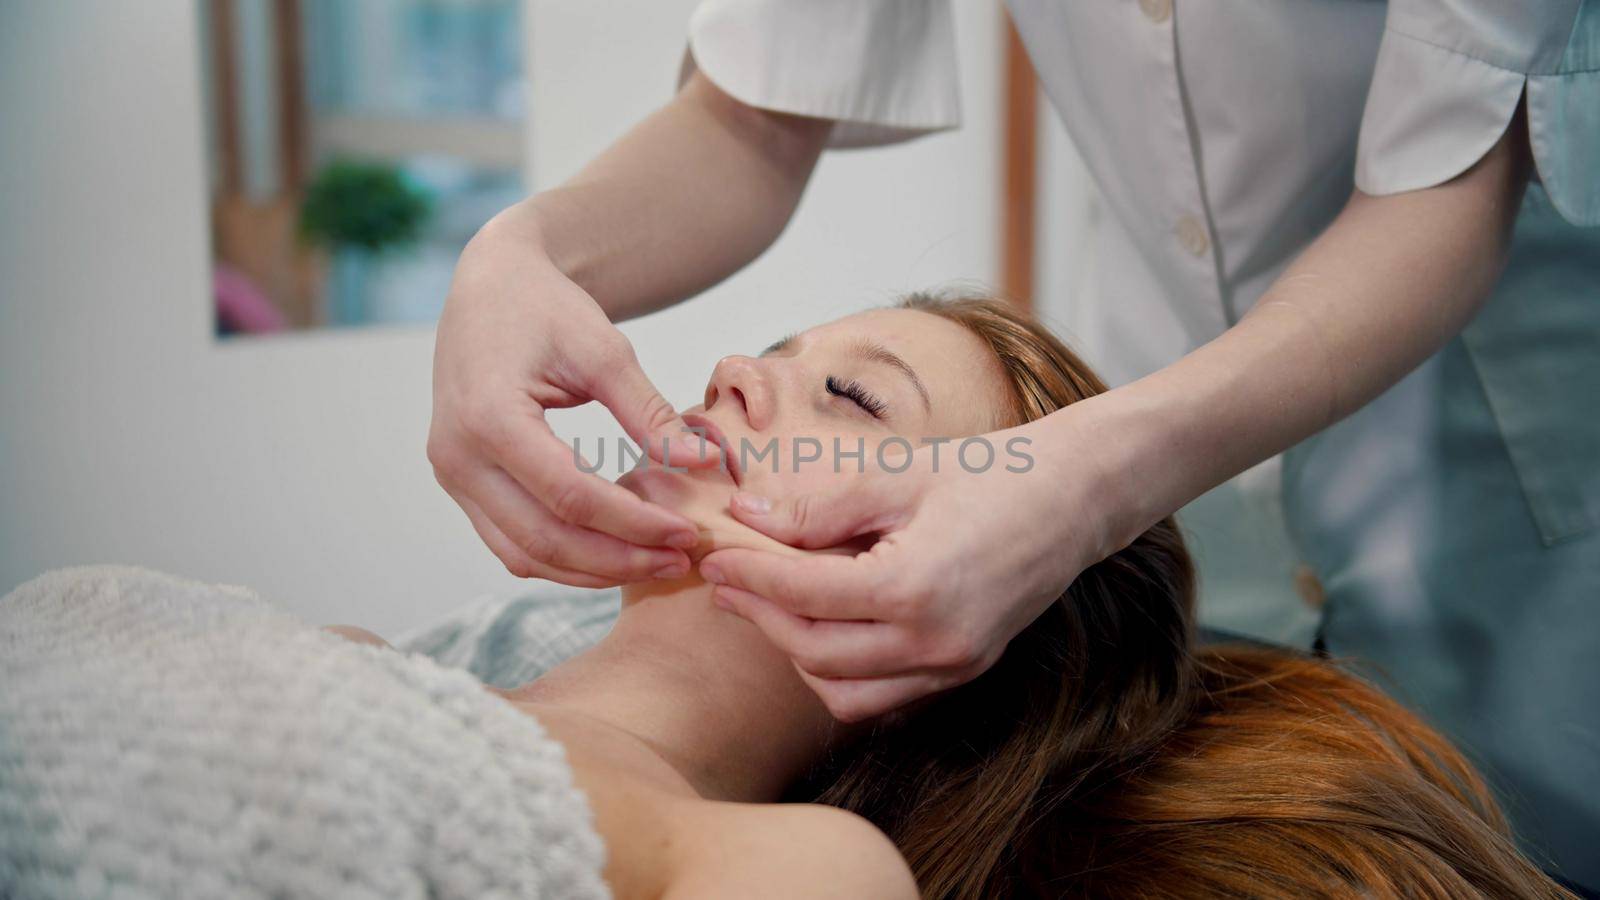 Massage - woman massage therapist massaging the face of a red-haired woman with her hands - indoor